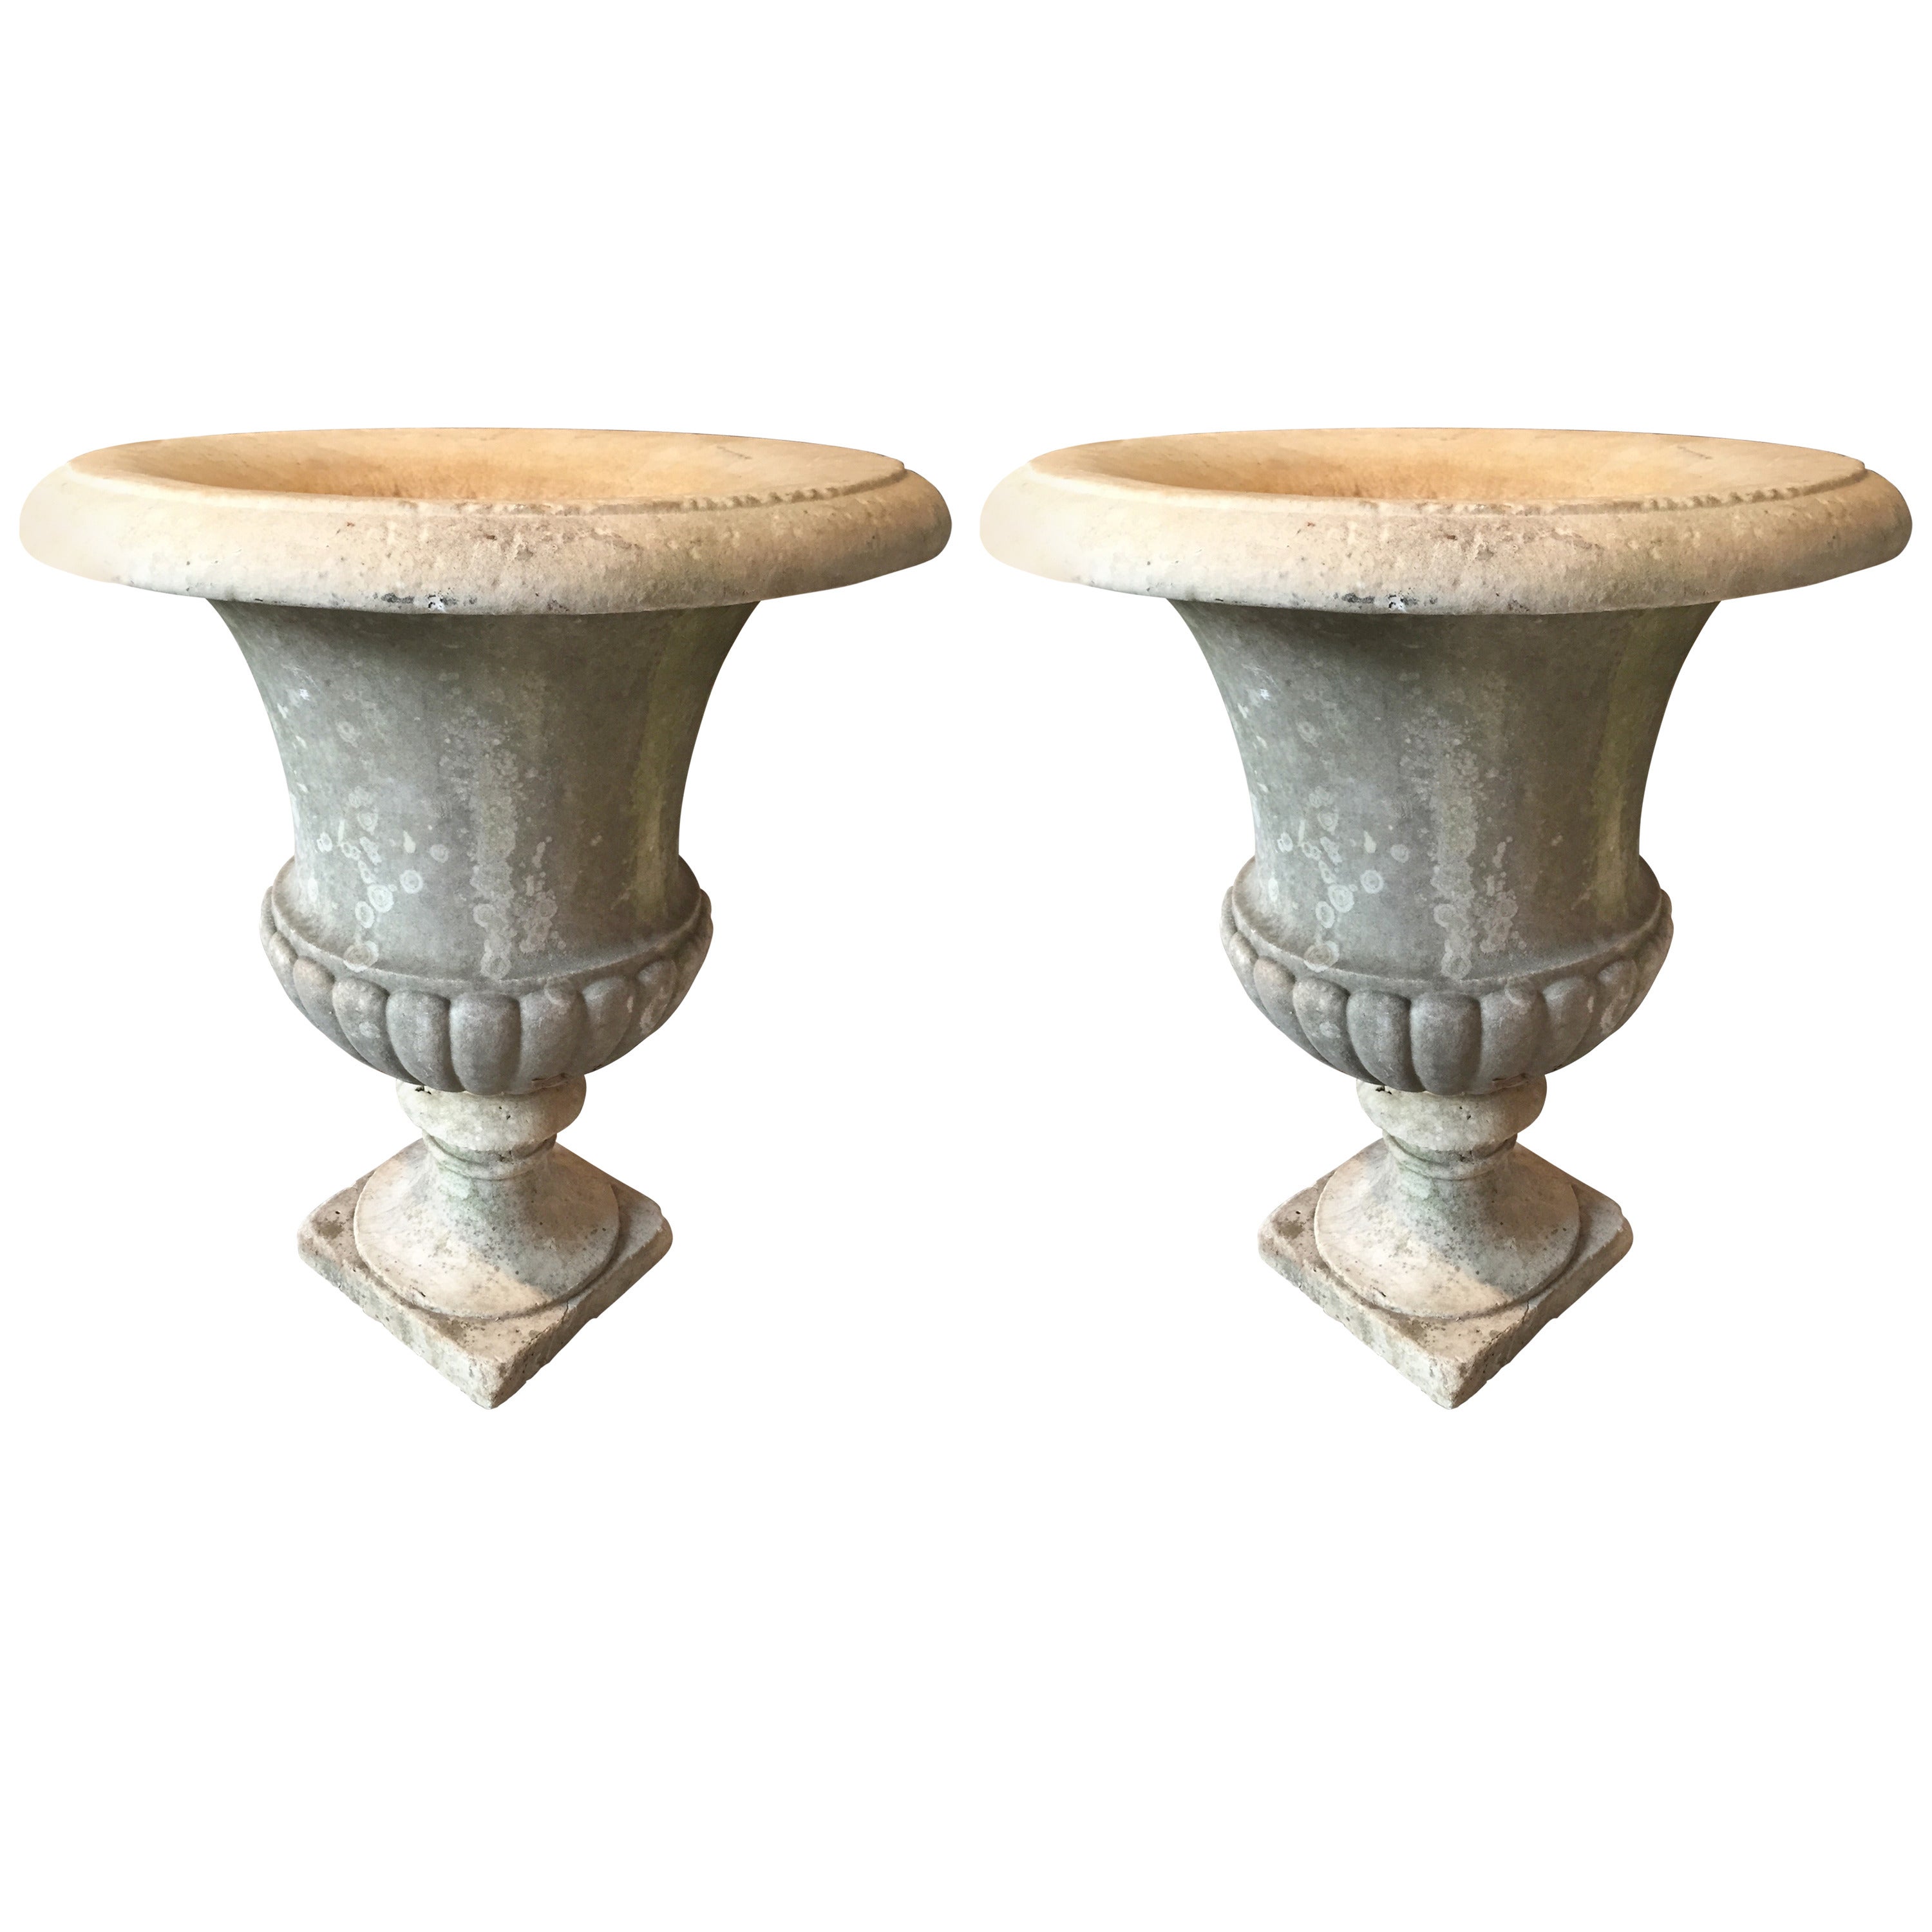 Large Pair of Hand-Carved 19th Century Marble Urns